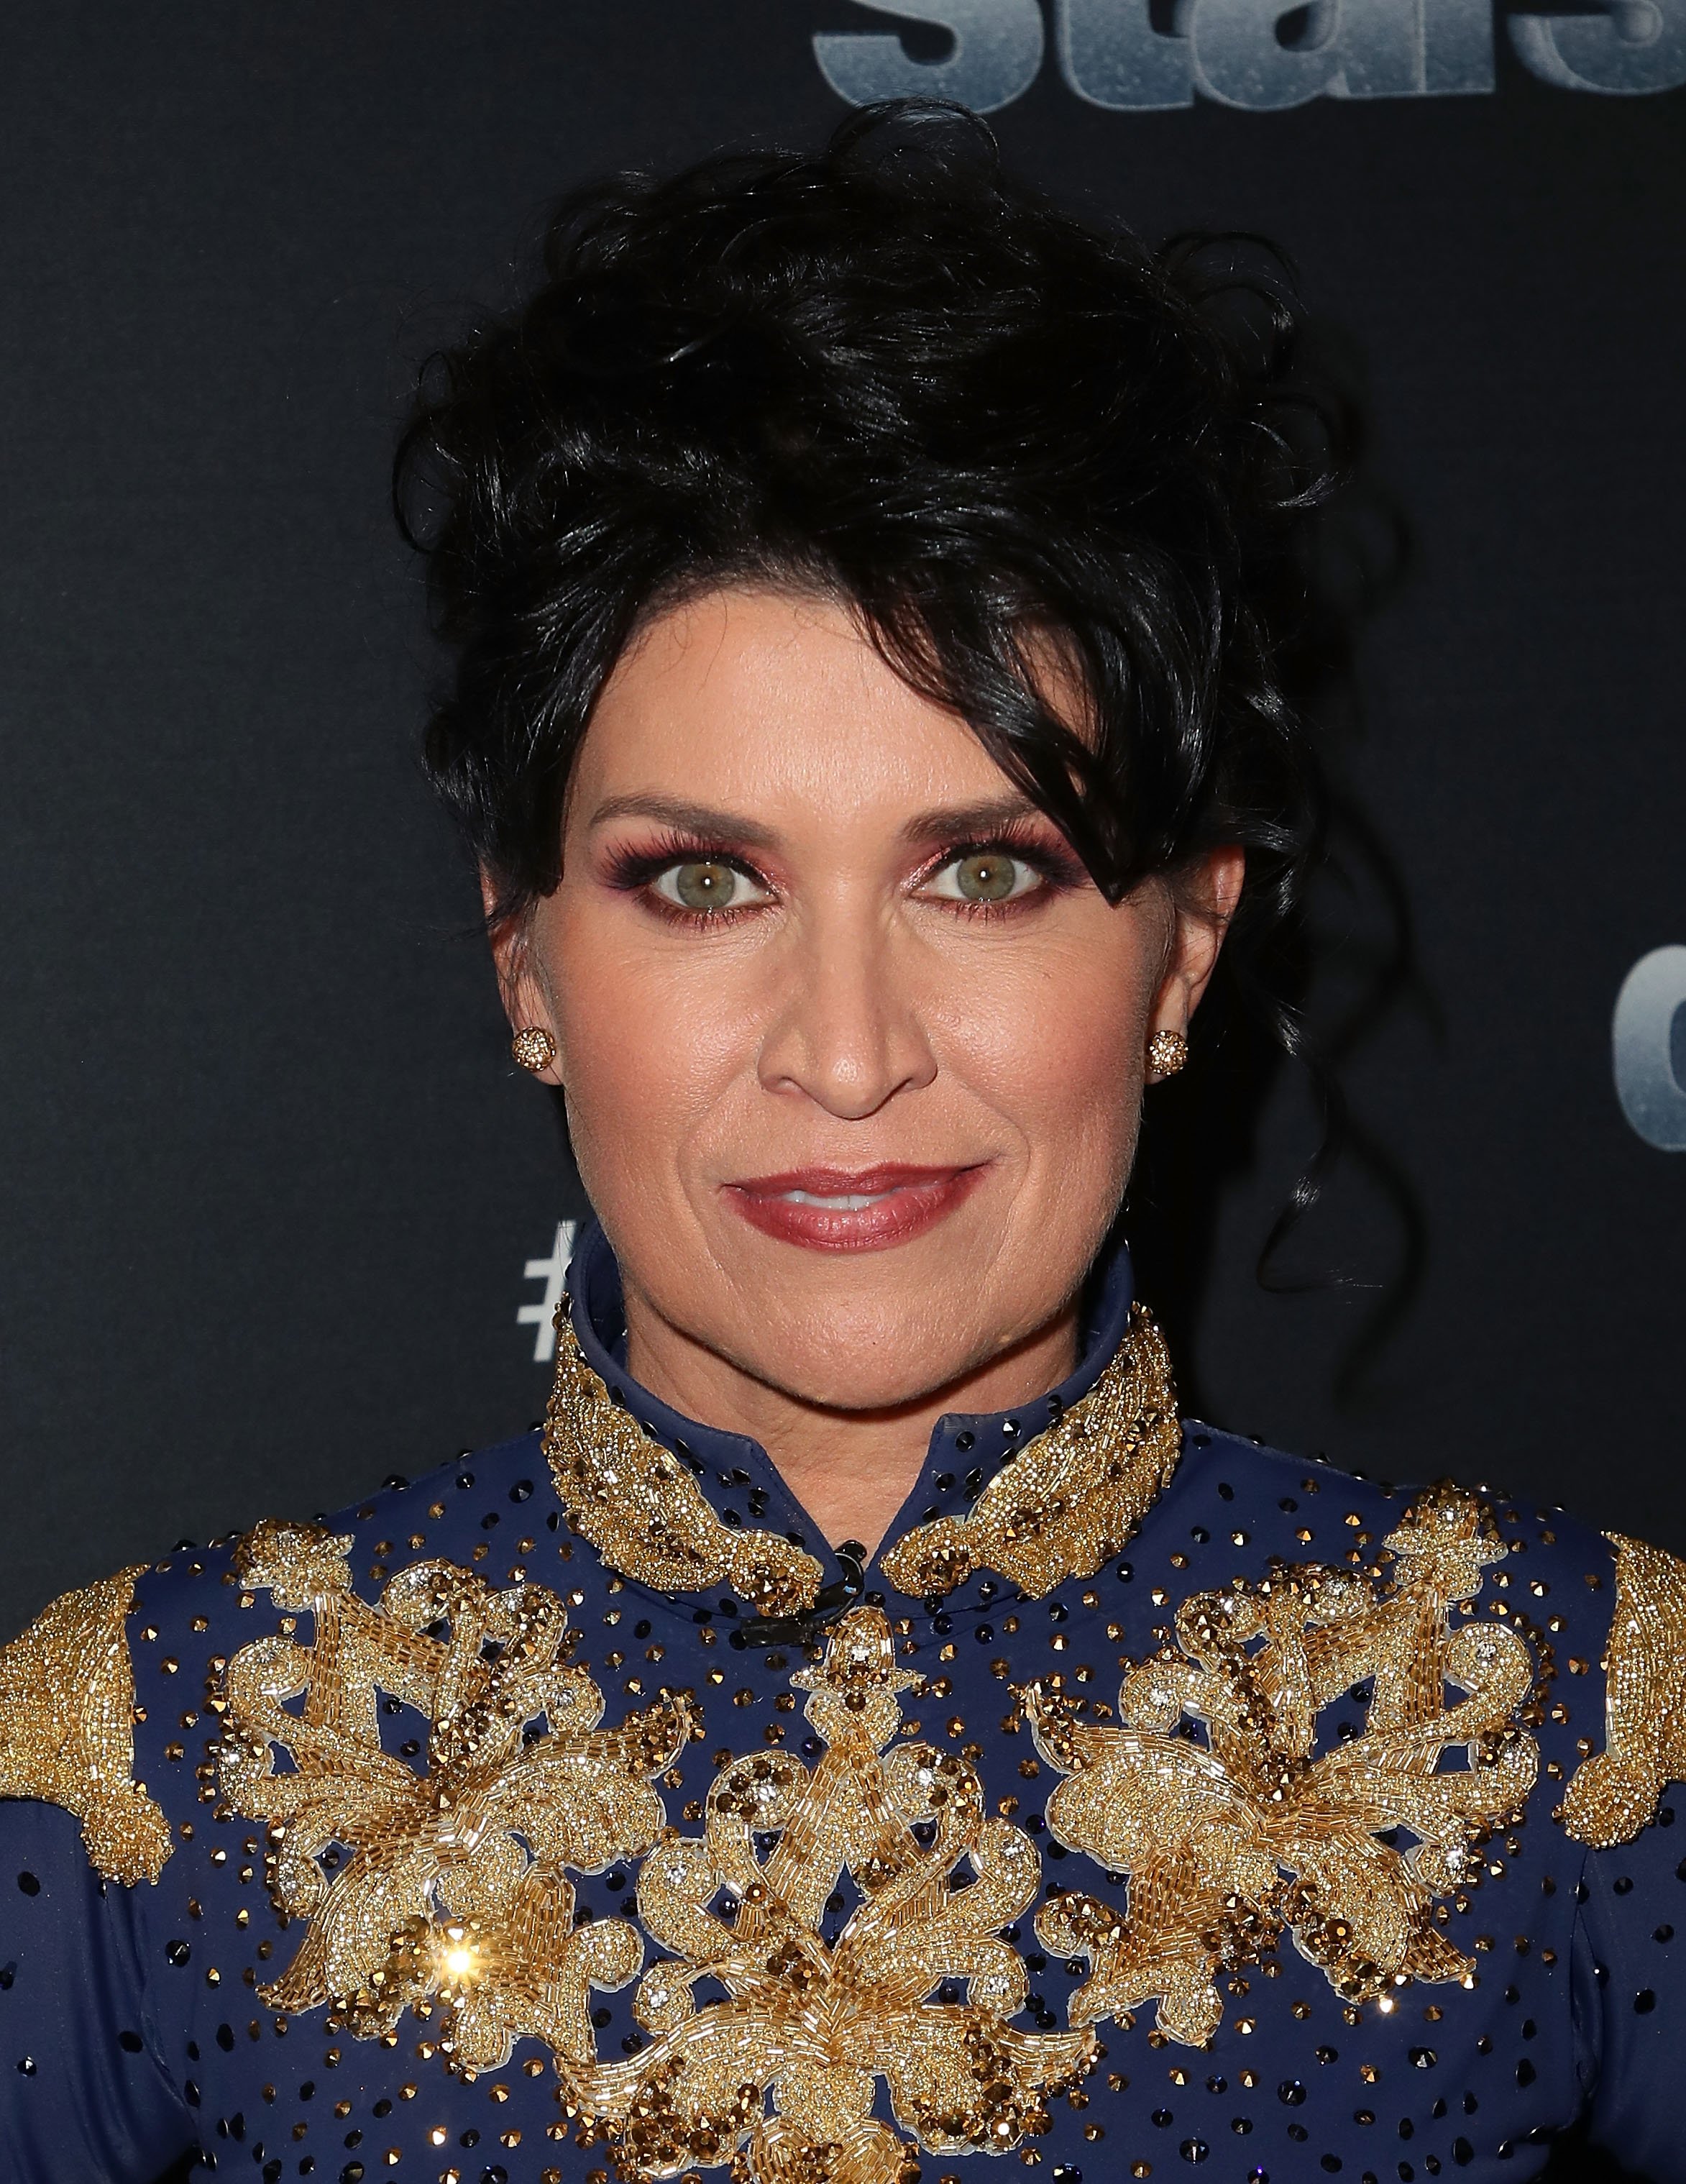 Nancy McKeon on the set of "Dancing with the Stars" on October 2, 2018 | Source: Getty Images